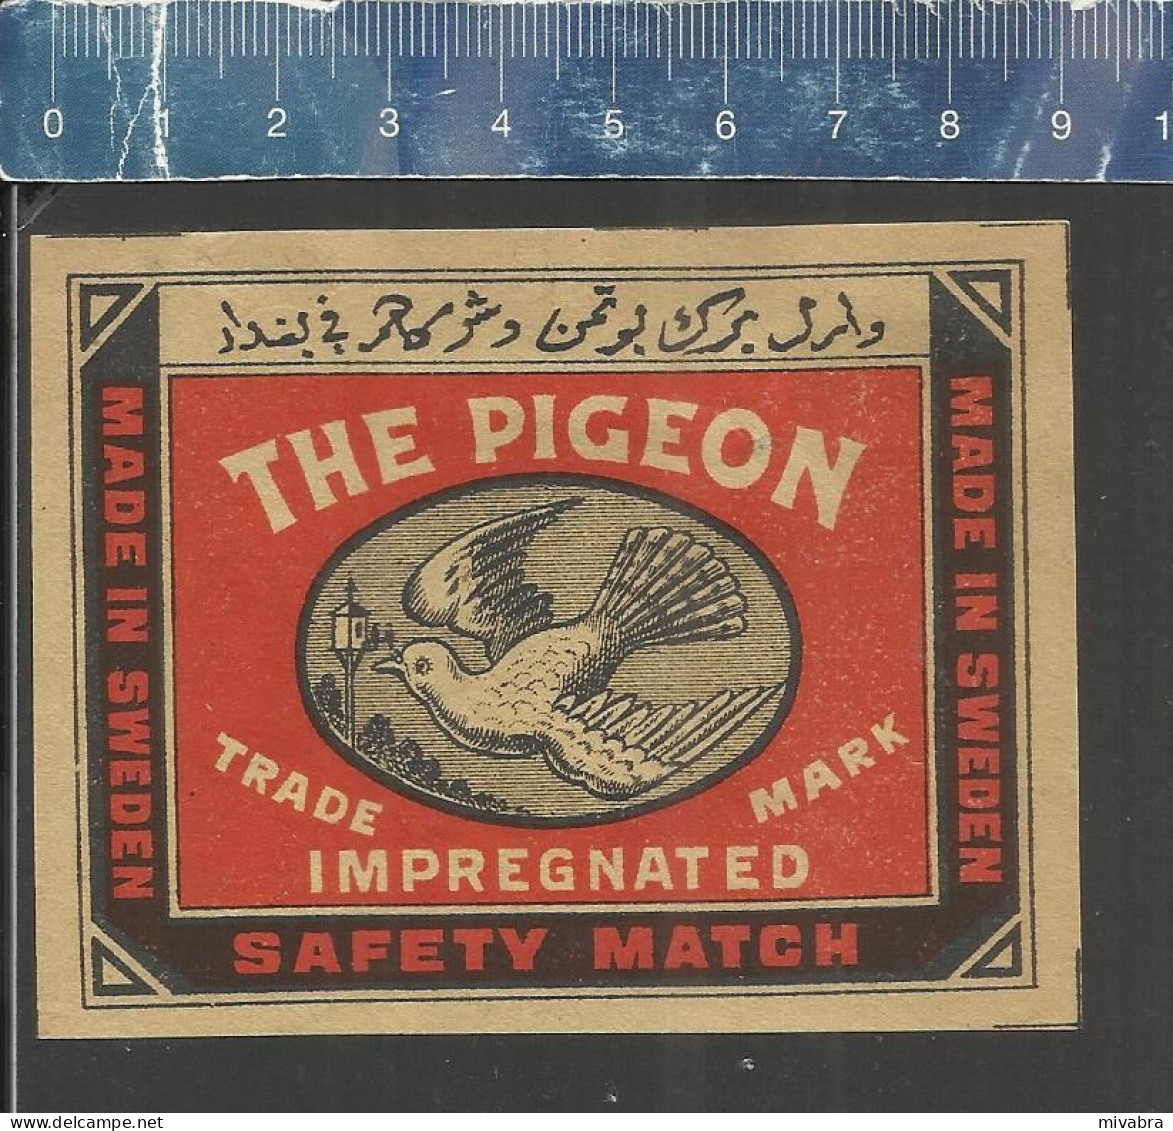 THE PIGEON  IMPREGNATED  SAFETY MATCH (PIGEONS - TAUBEN - DUIVEN PALOMA ) OLD  EXPORT MATCHBOX LABEL MADE IN SWEDEN - Scatole Di Fiammiferi - Etichette